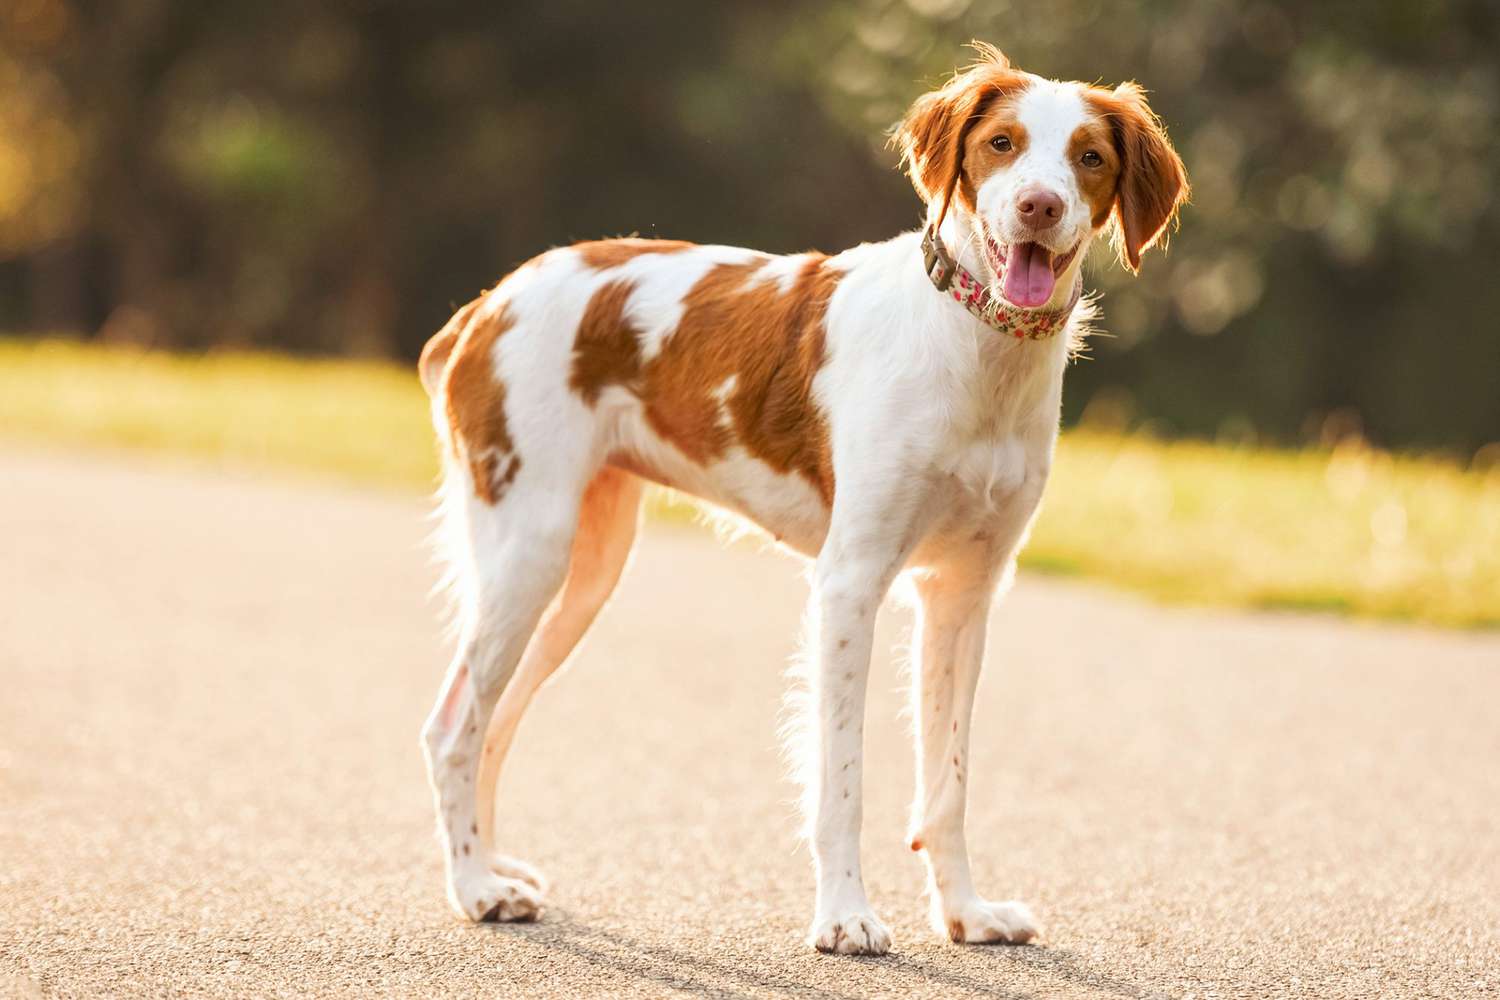 Brittany spaniel stands in middle of road